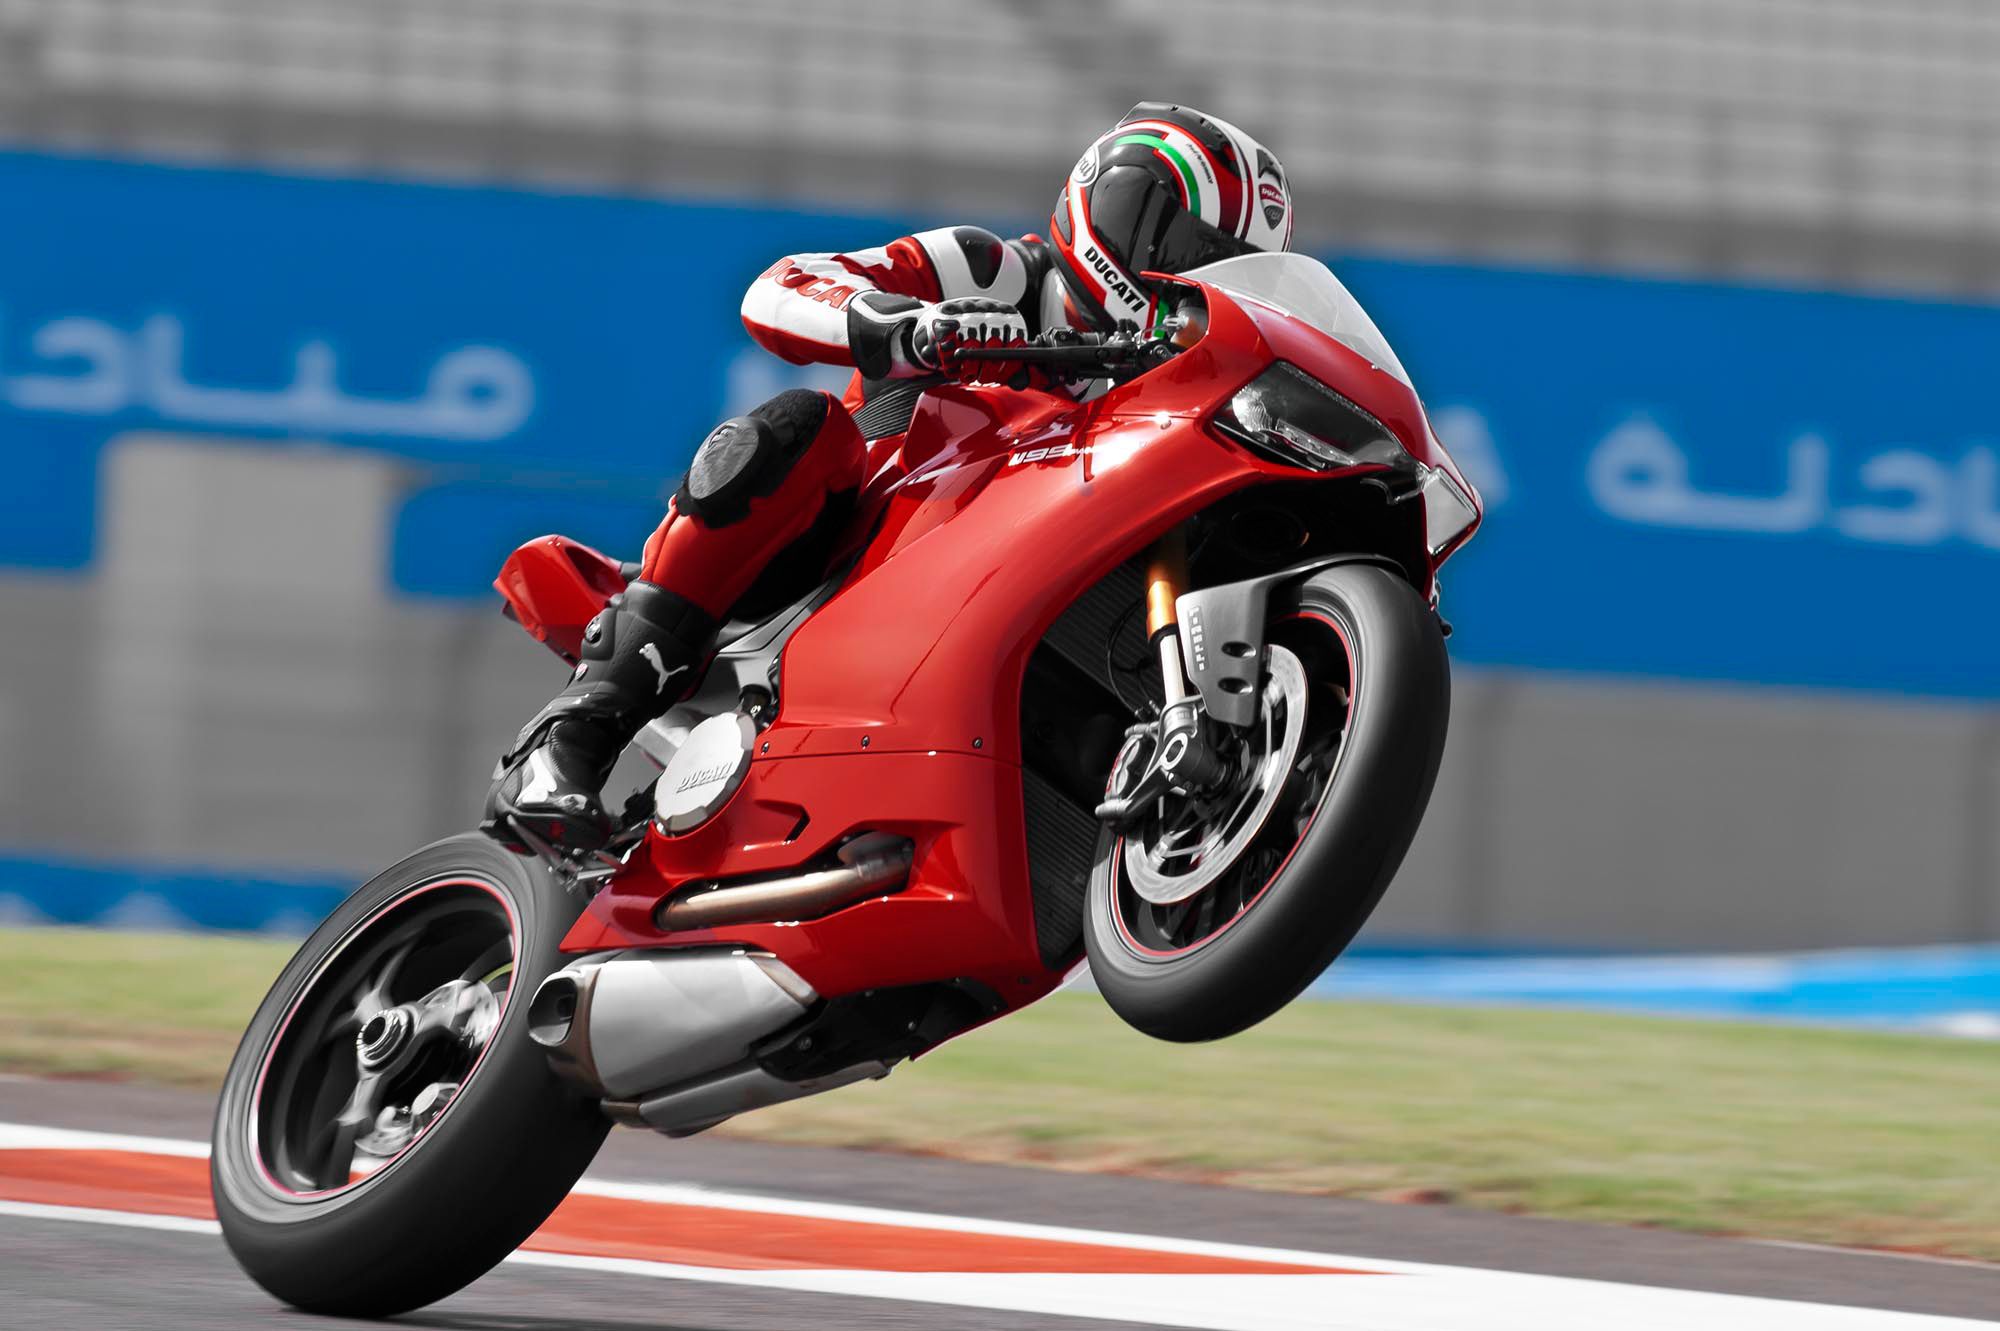 Ducati 1199 Panigale recalled! Here are the details | Motoroids